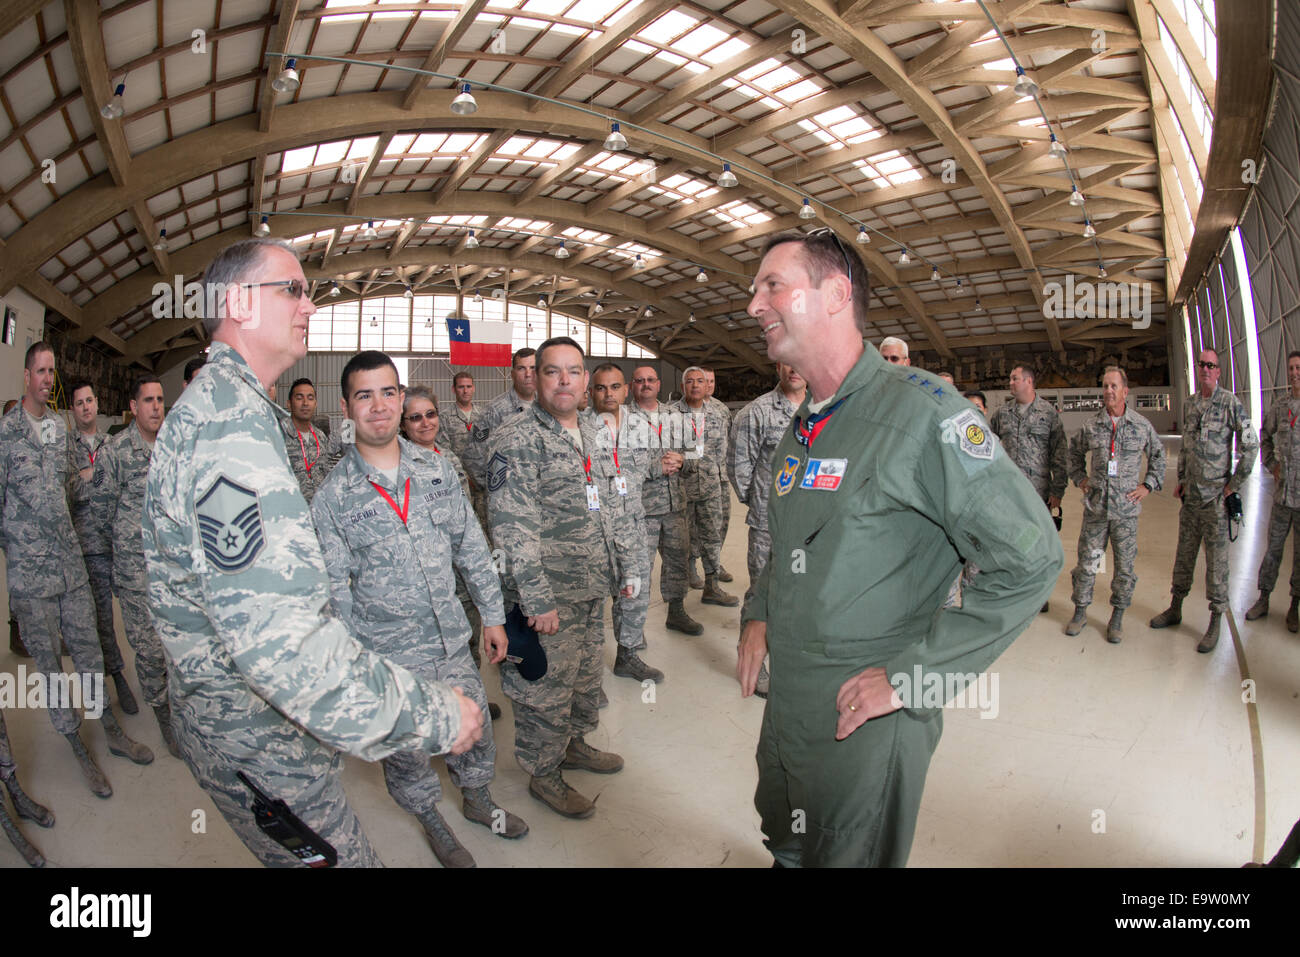 U.S. Air Force Lt. Gen. Joseph L. Lengyel, foreground right, the vice chief of the National Guard Bureau, meets with Airmen assigned to his former unit, the 149th Fighter Wing, Texas Air National Guard, at Cerro Moreno Air Base near Antofagasta, Chile, Oc Stock Photo